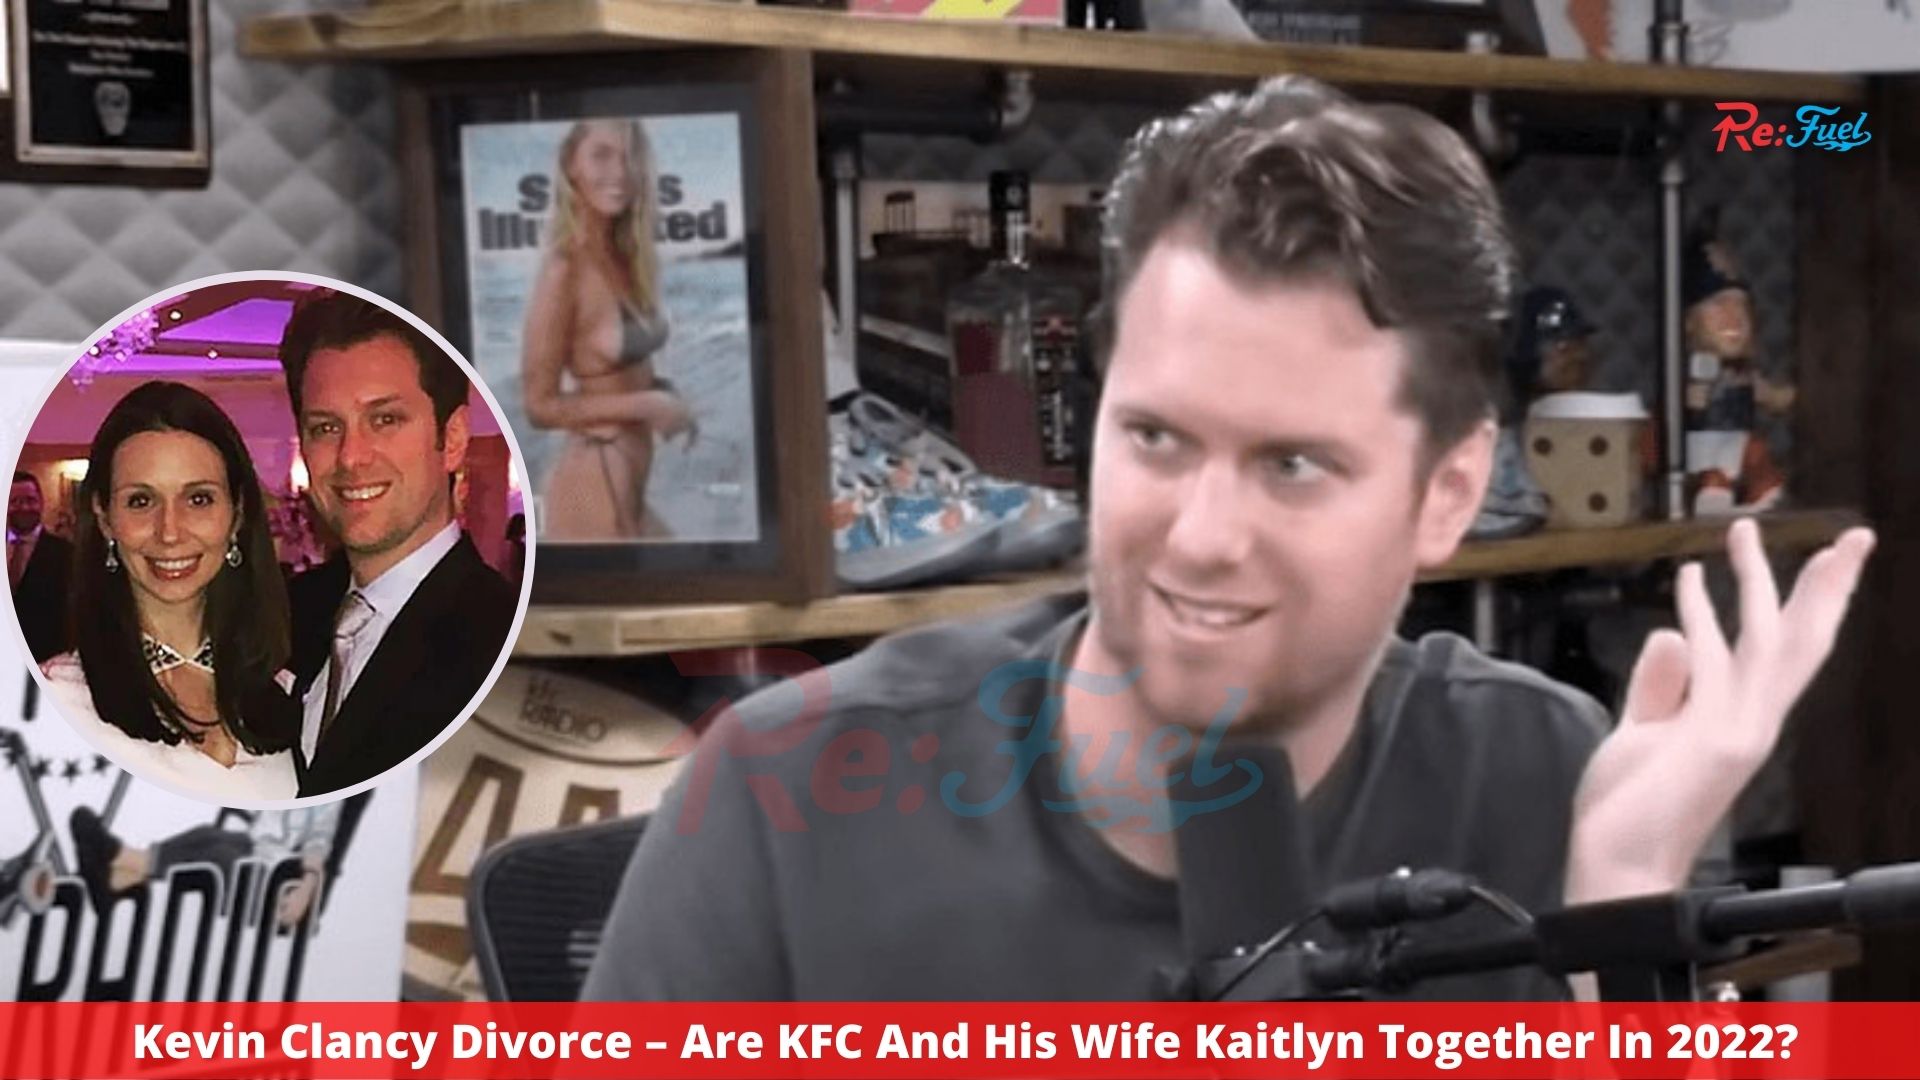 Kevin Clancy Divorce – Are KFC And His Wife Kaitlyn Together In 2022?